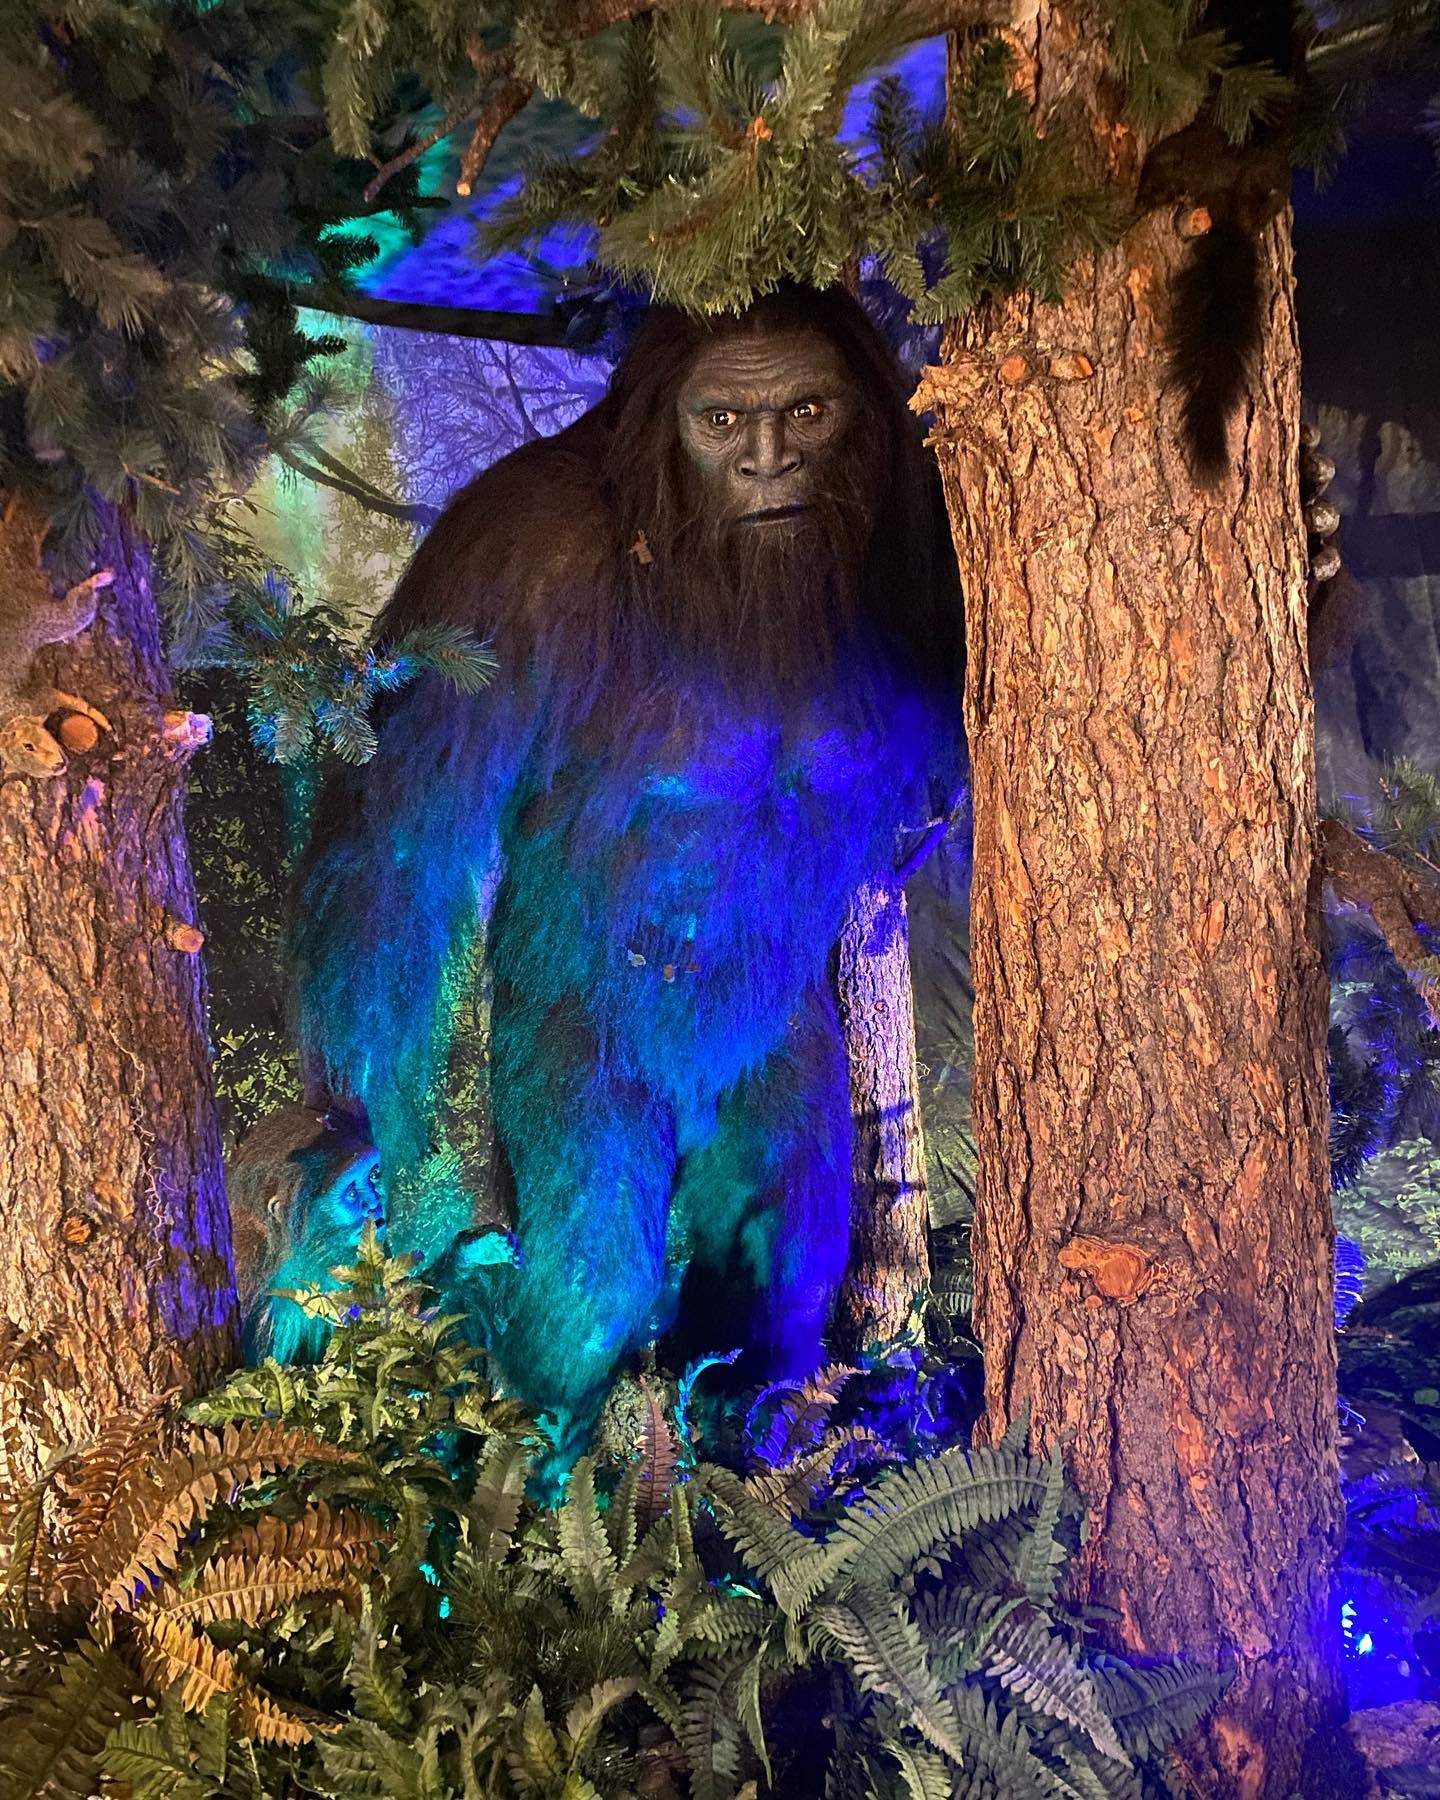 A model of Bigfoot at Sasquatch Outpost shop and museum, in Bailey, Colorado. Photo: Instagram / @thesasquatchoutpost